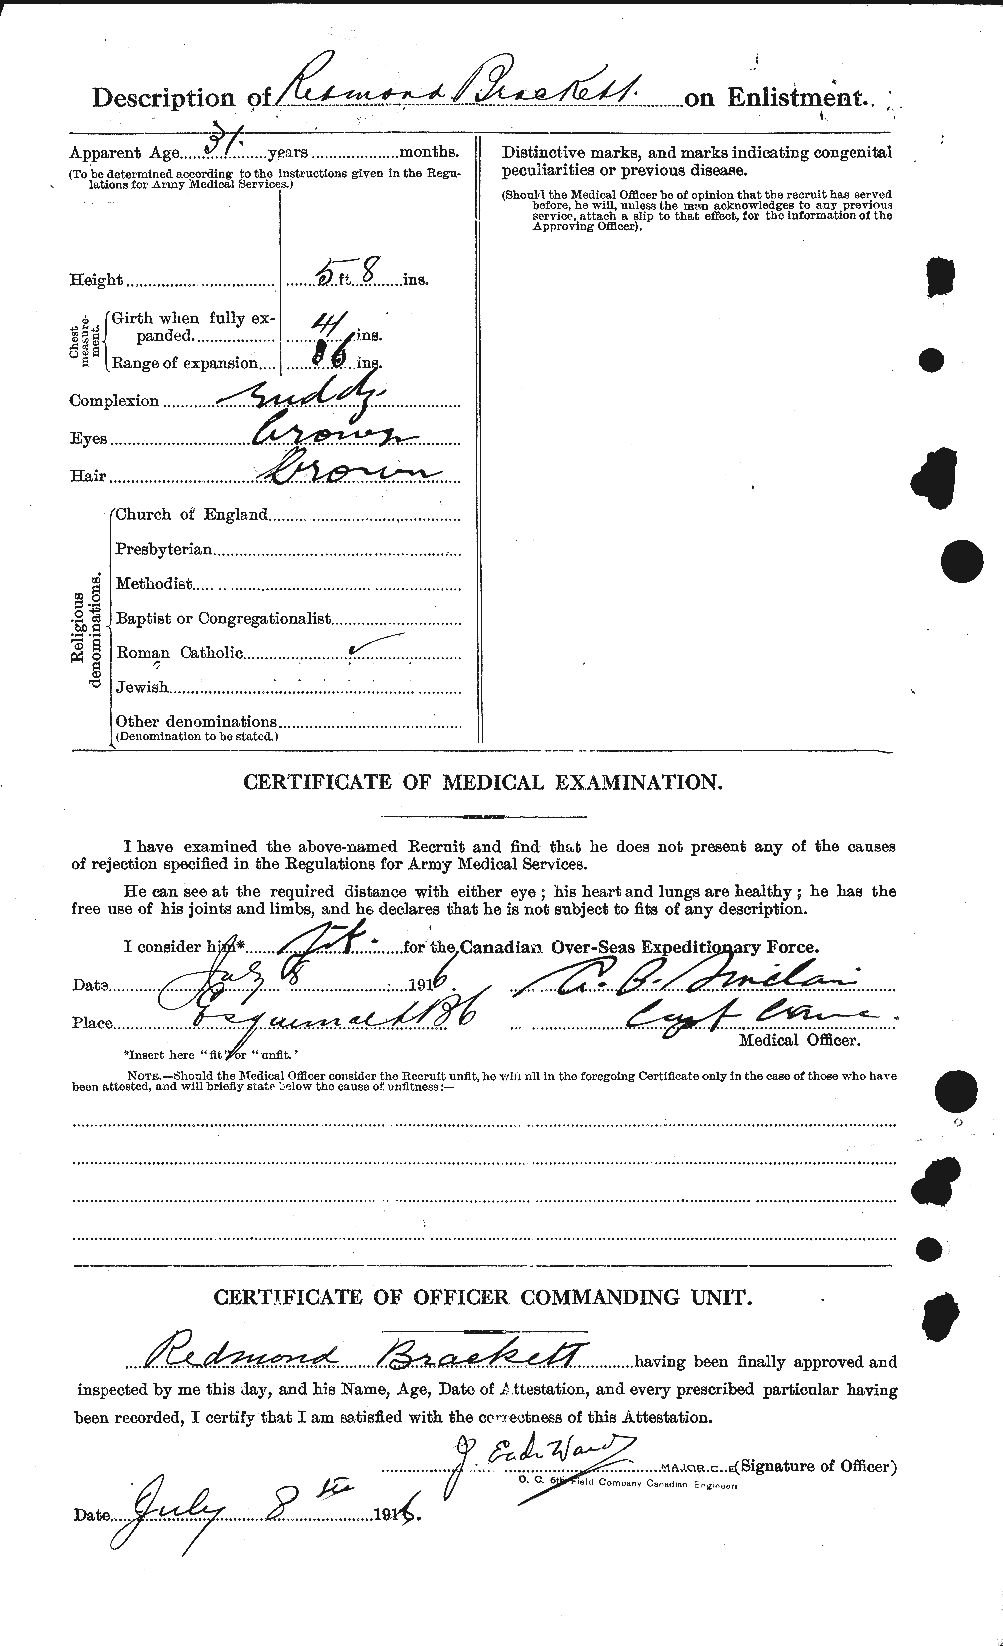 Personnel Records of the First World War - CEF 254739b